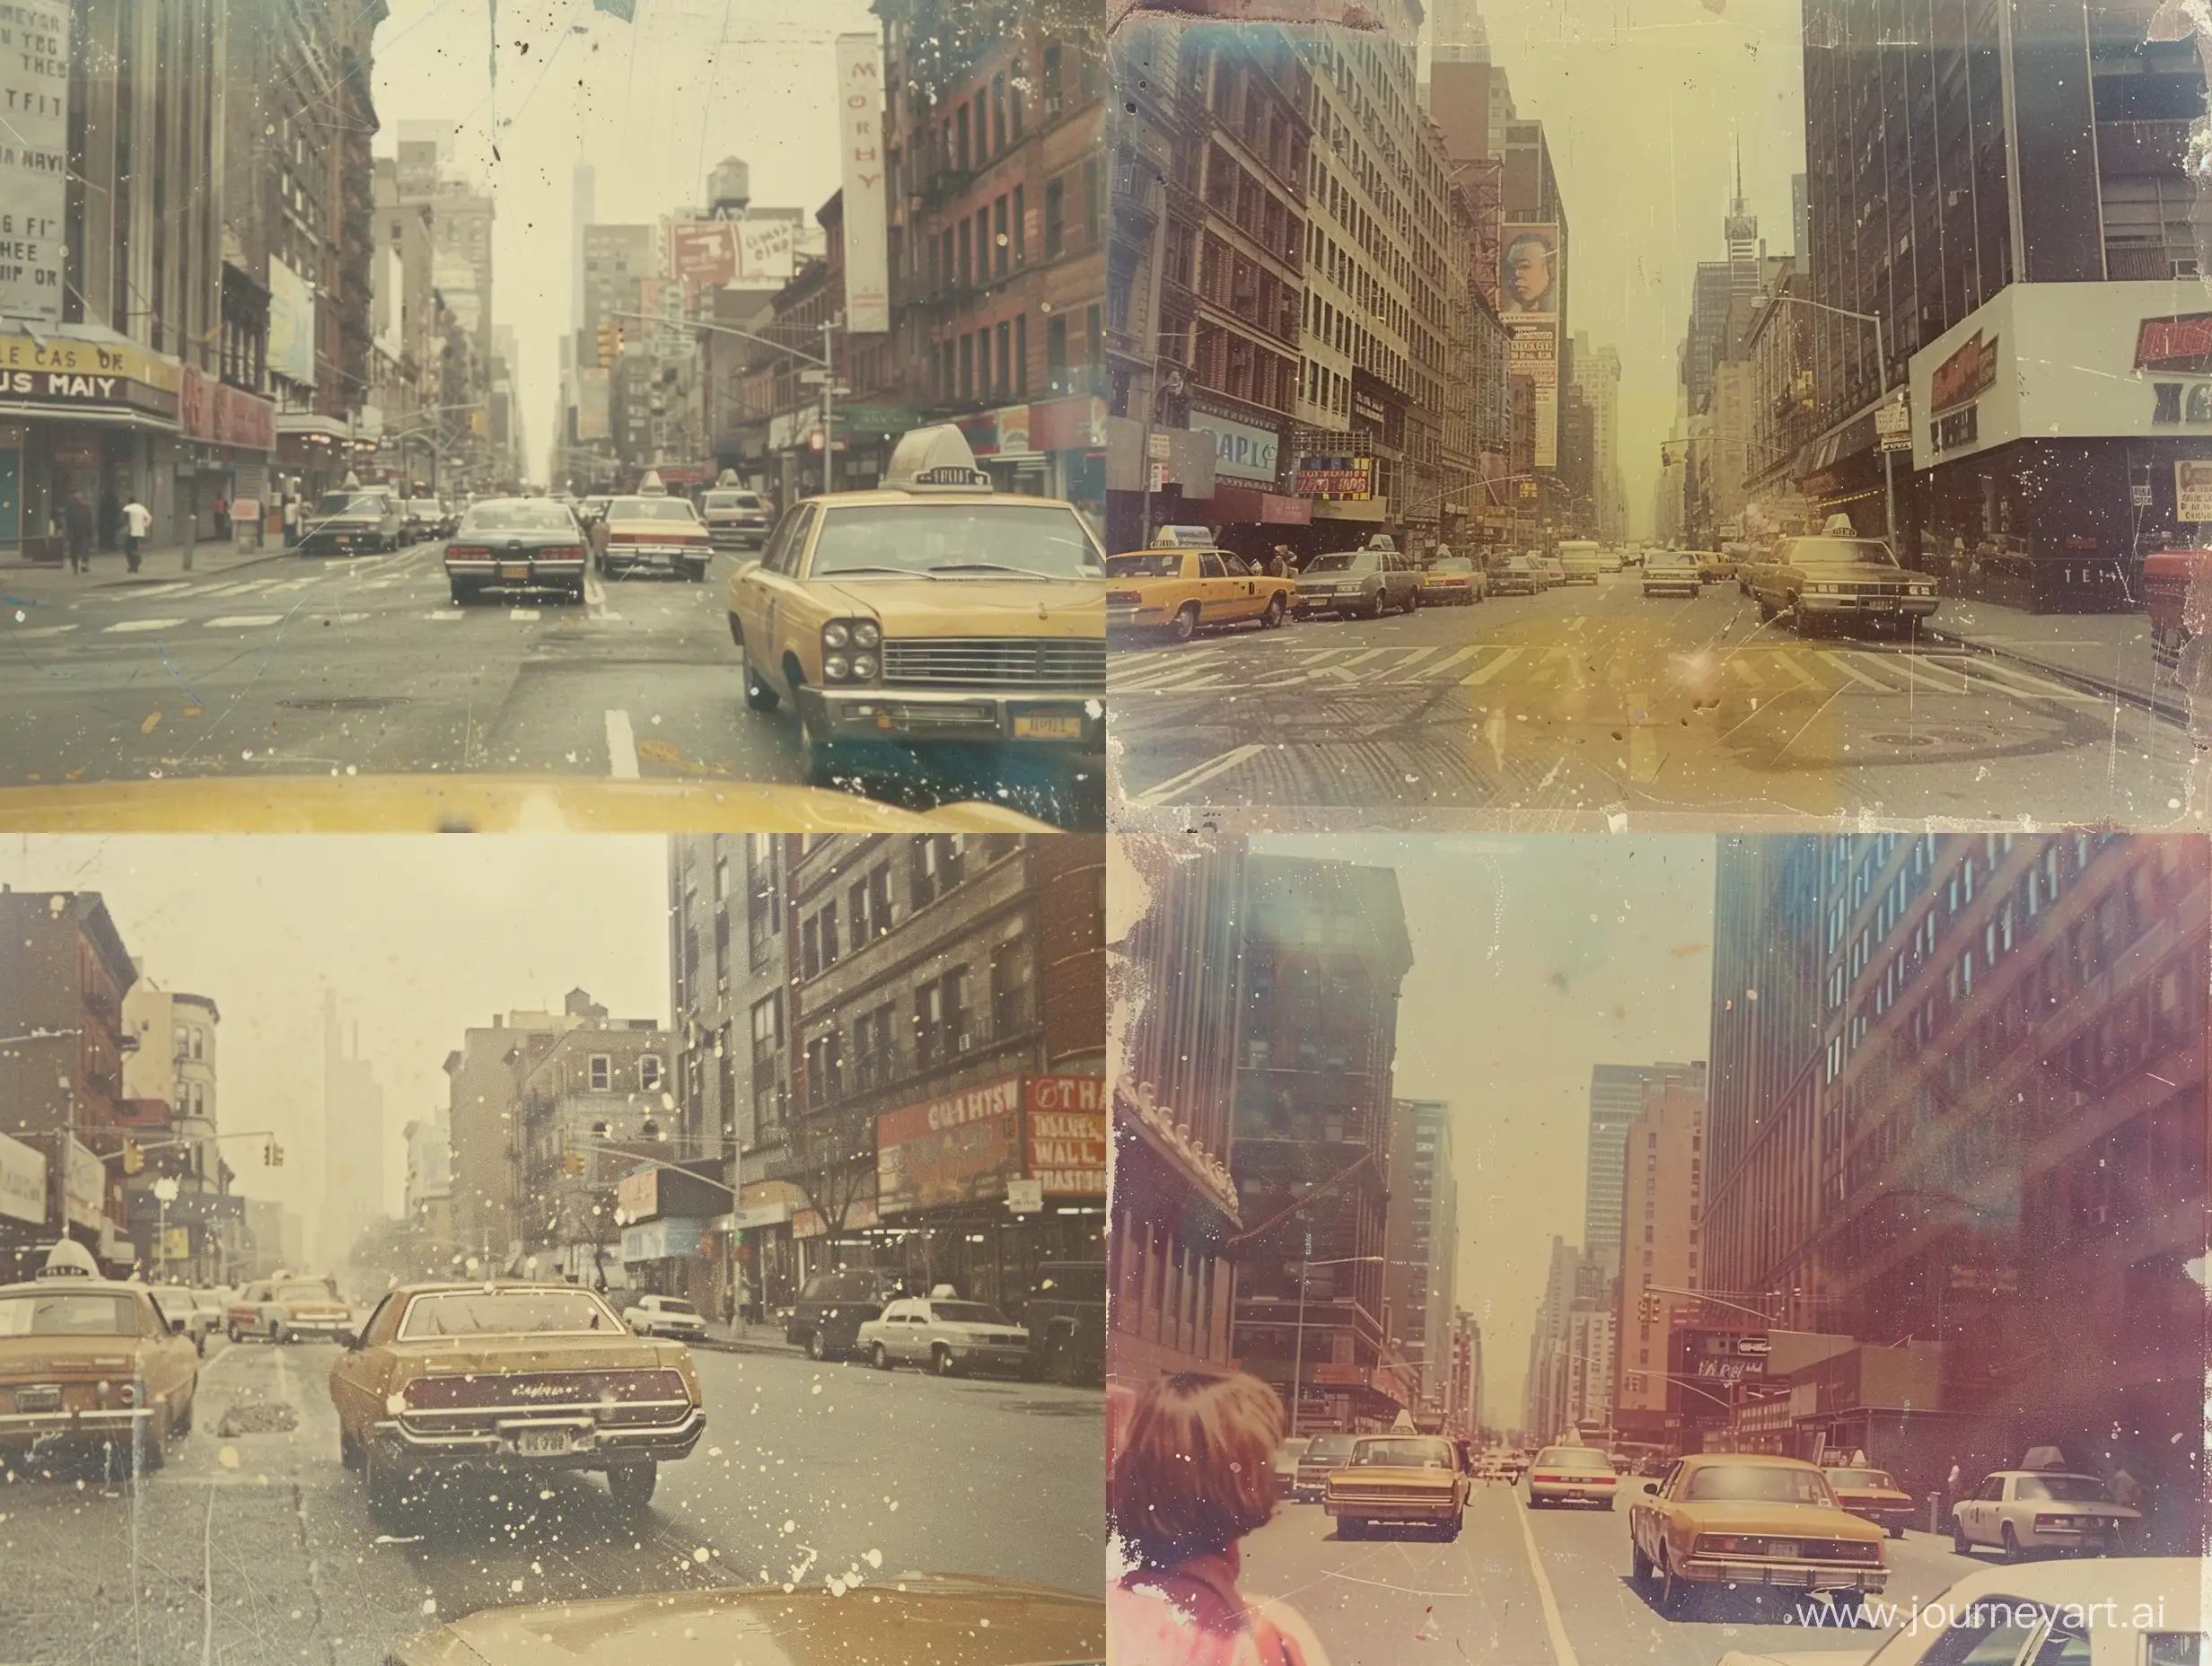 Faded yellowed aged Instamatic candid photo of Manhattan street scene in 1975, color, dusty, speckled